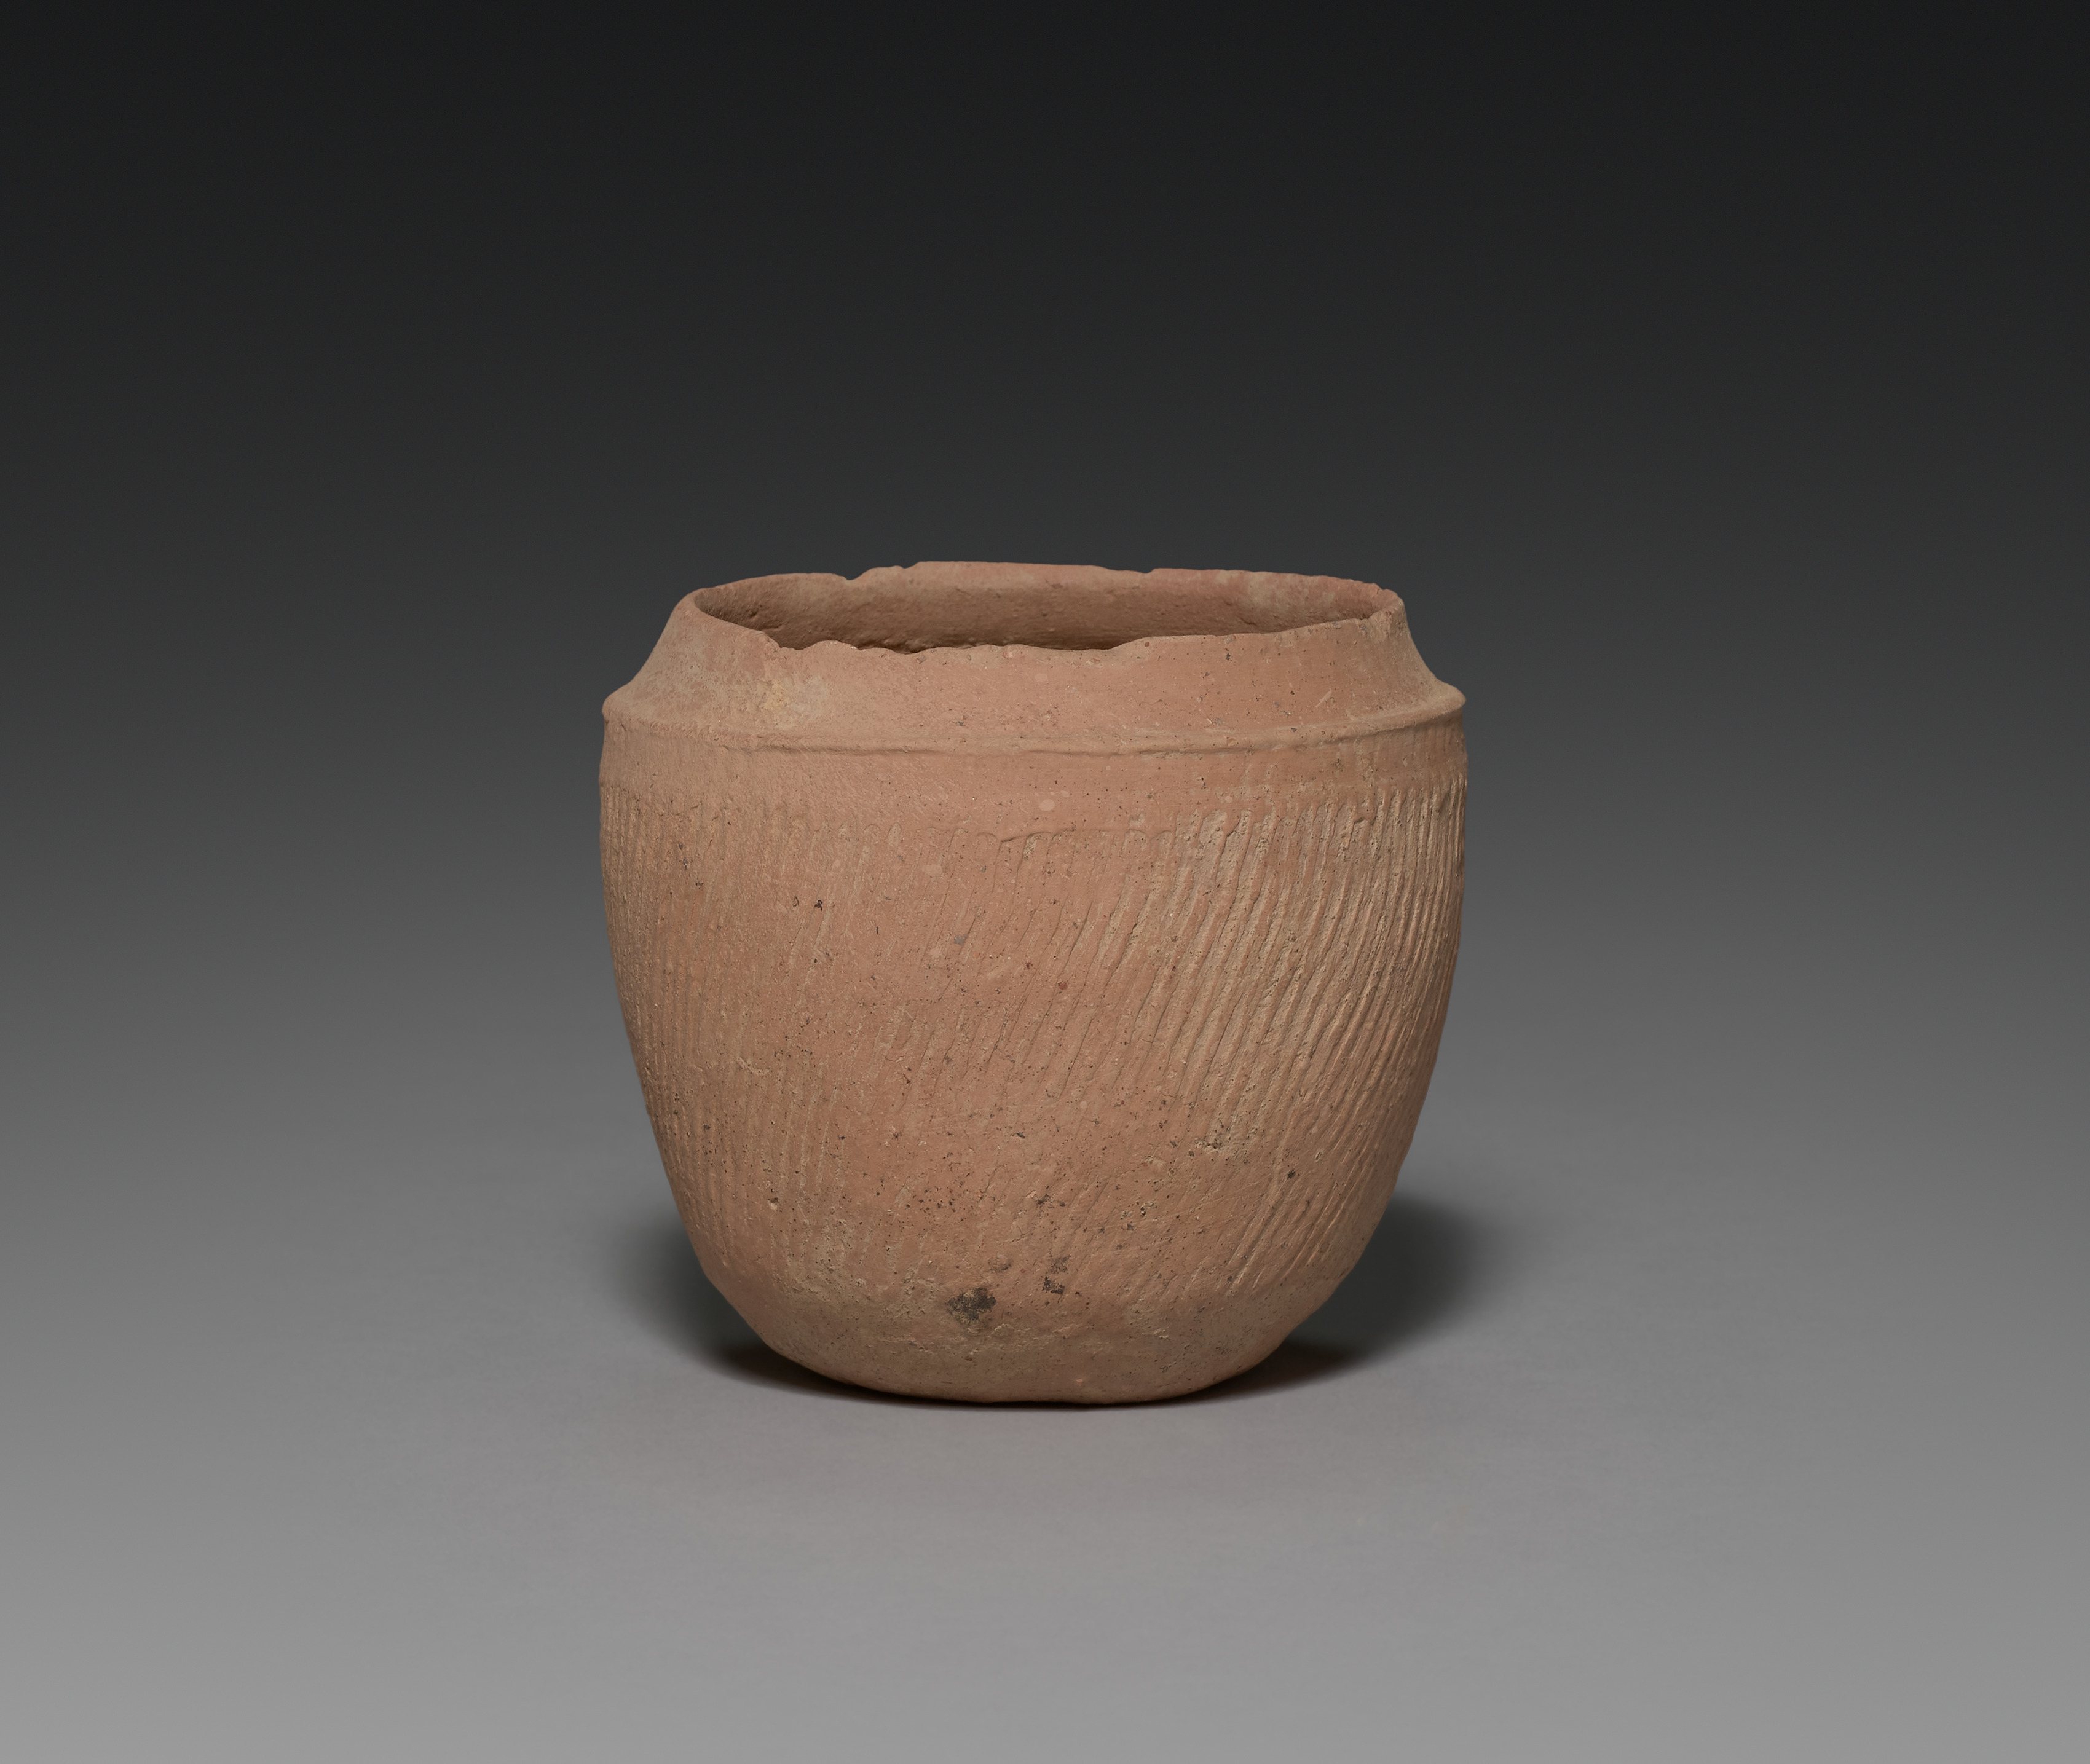 Covered Jar with Horn Handle